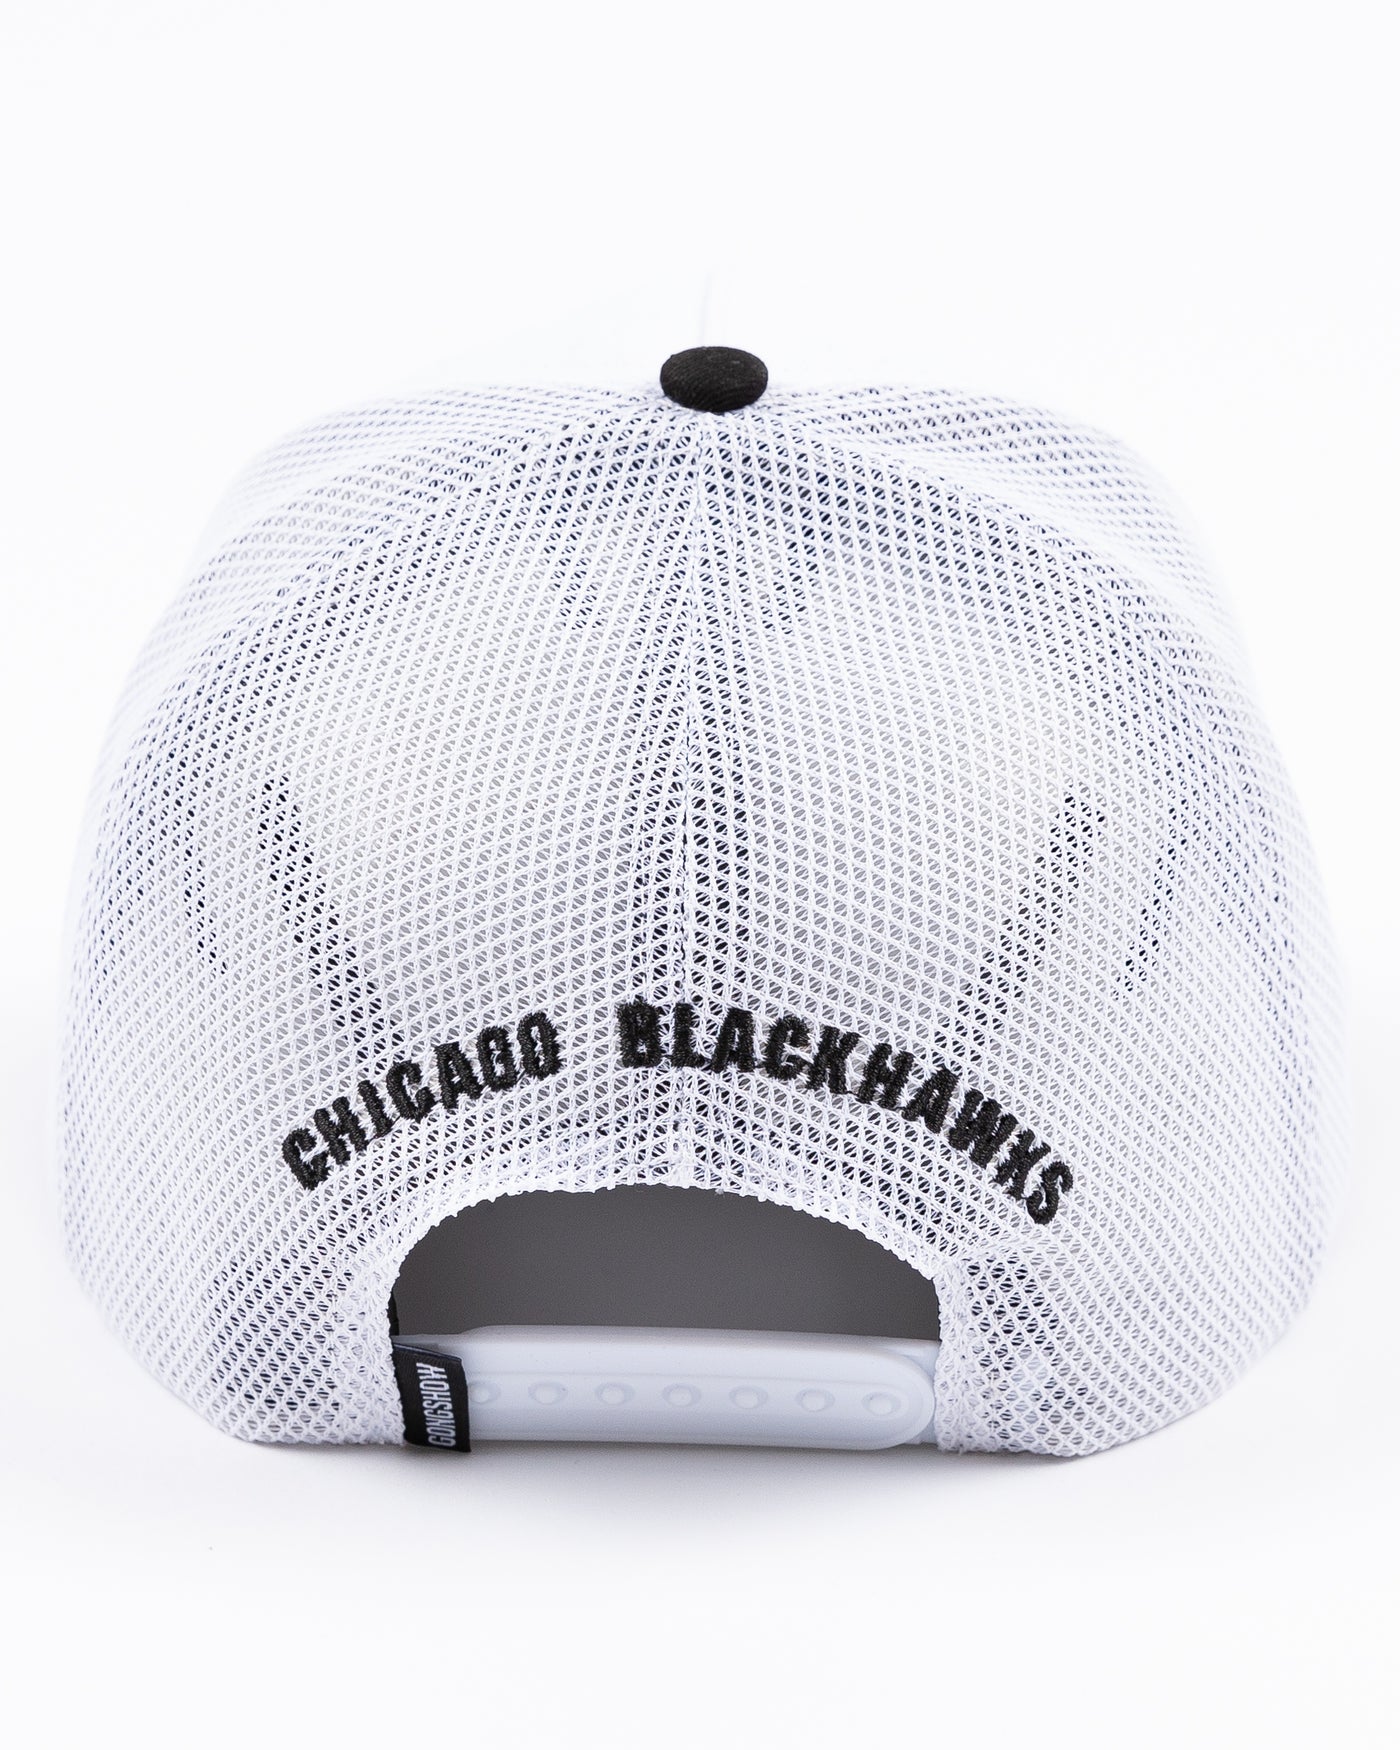 two tone black and white Gongshow trucker hat with rope detail and Chicago Blackhawks primary logo embroidered on the front - back lay flat